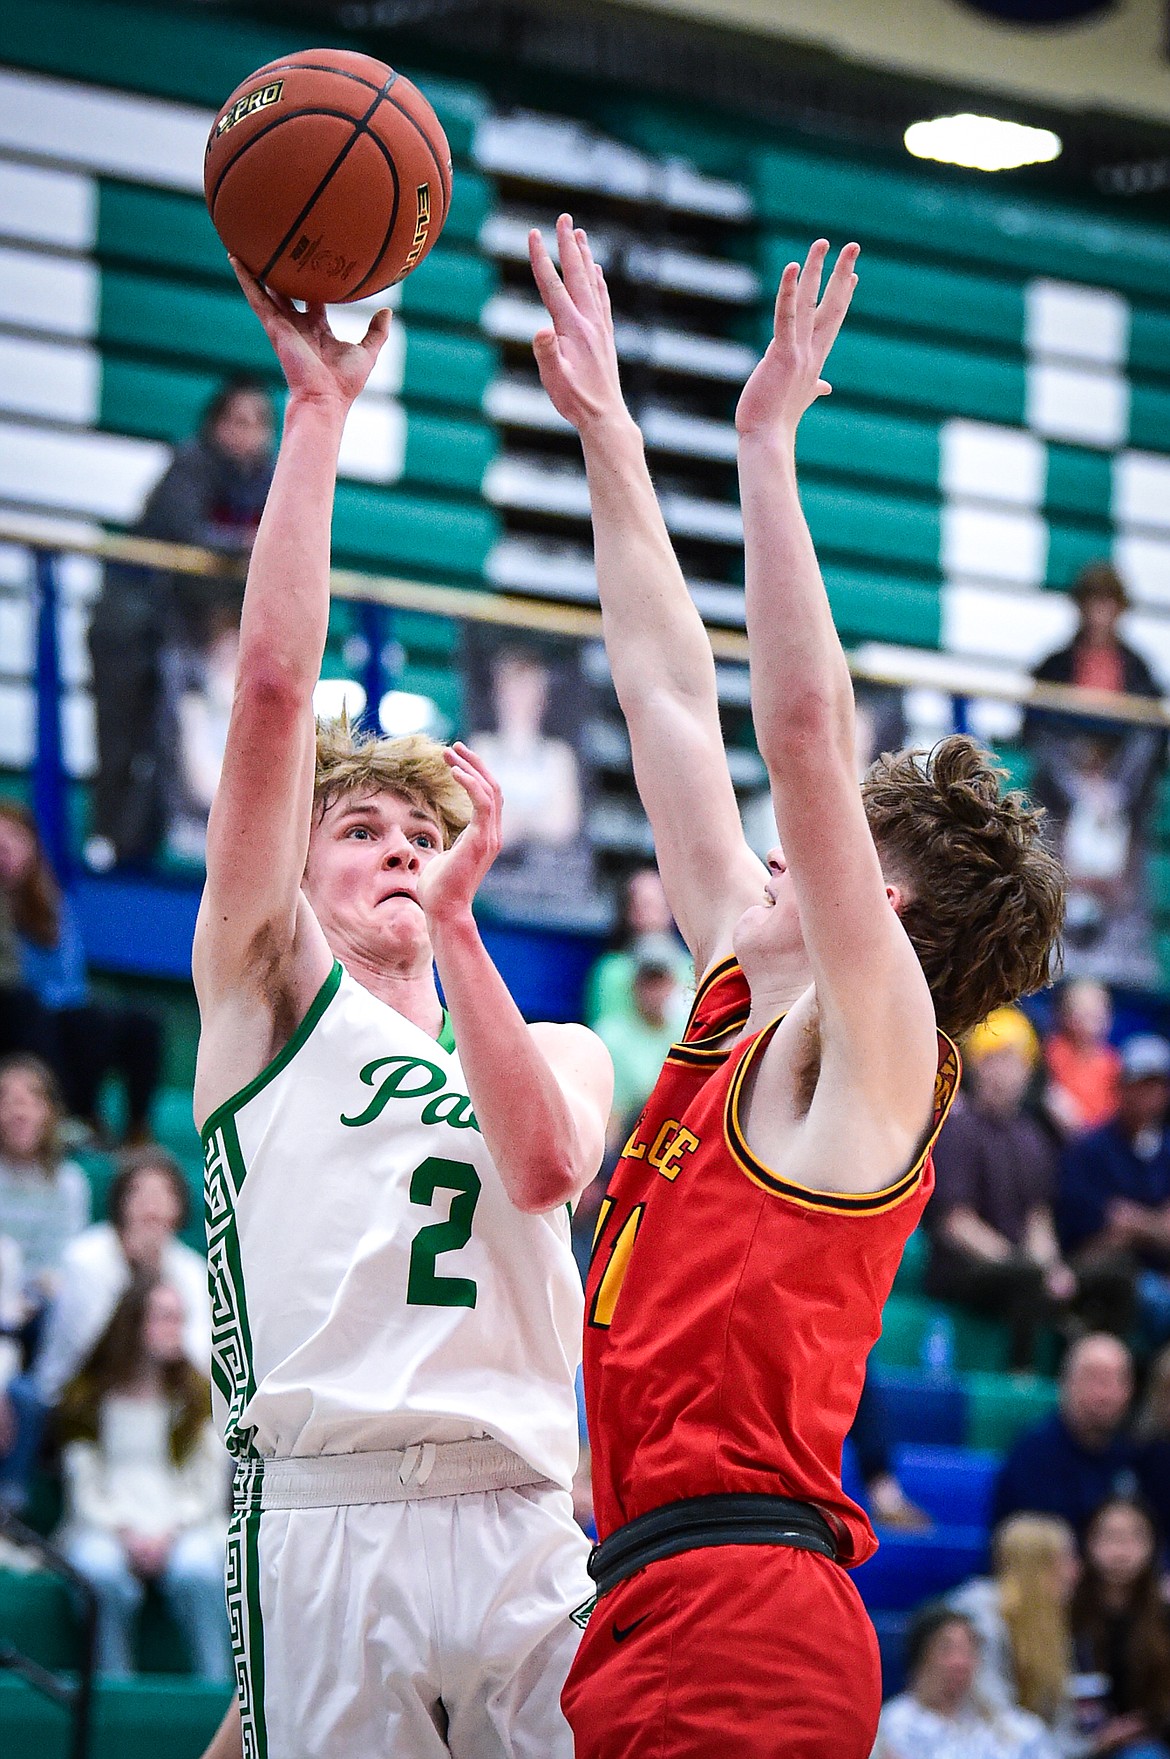 Glacier's Liam Ells (2) drives to the basket in the first quarter against Missoula Hellgate at Glacier High School on Tuesday, Feb. 20. (Casey Kreider/Daily Inter Lake)